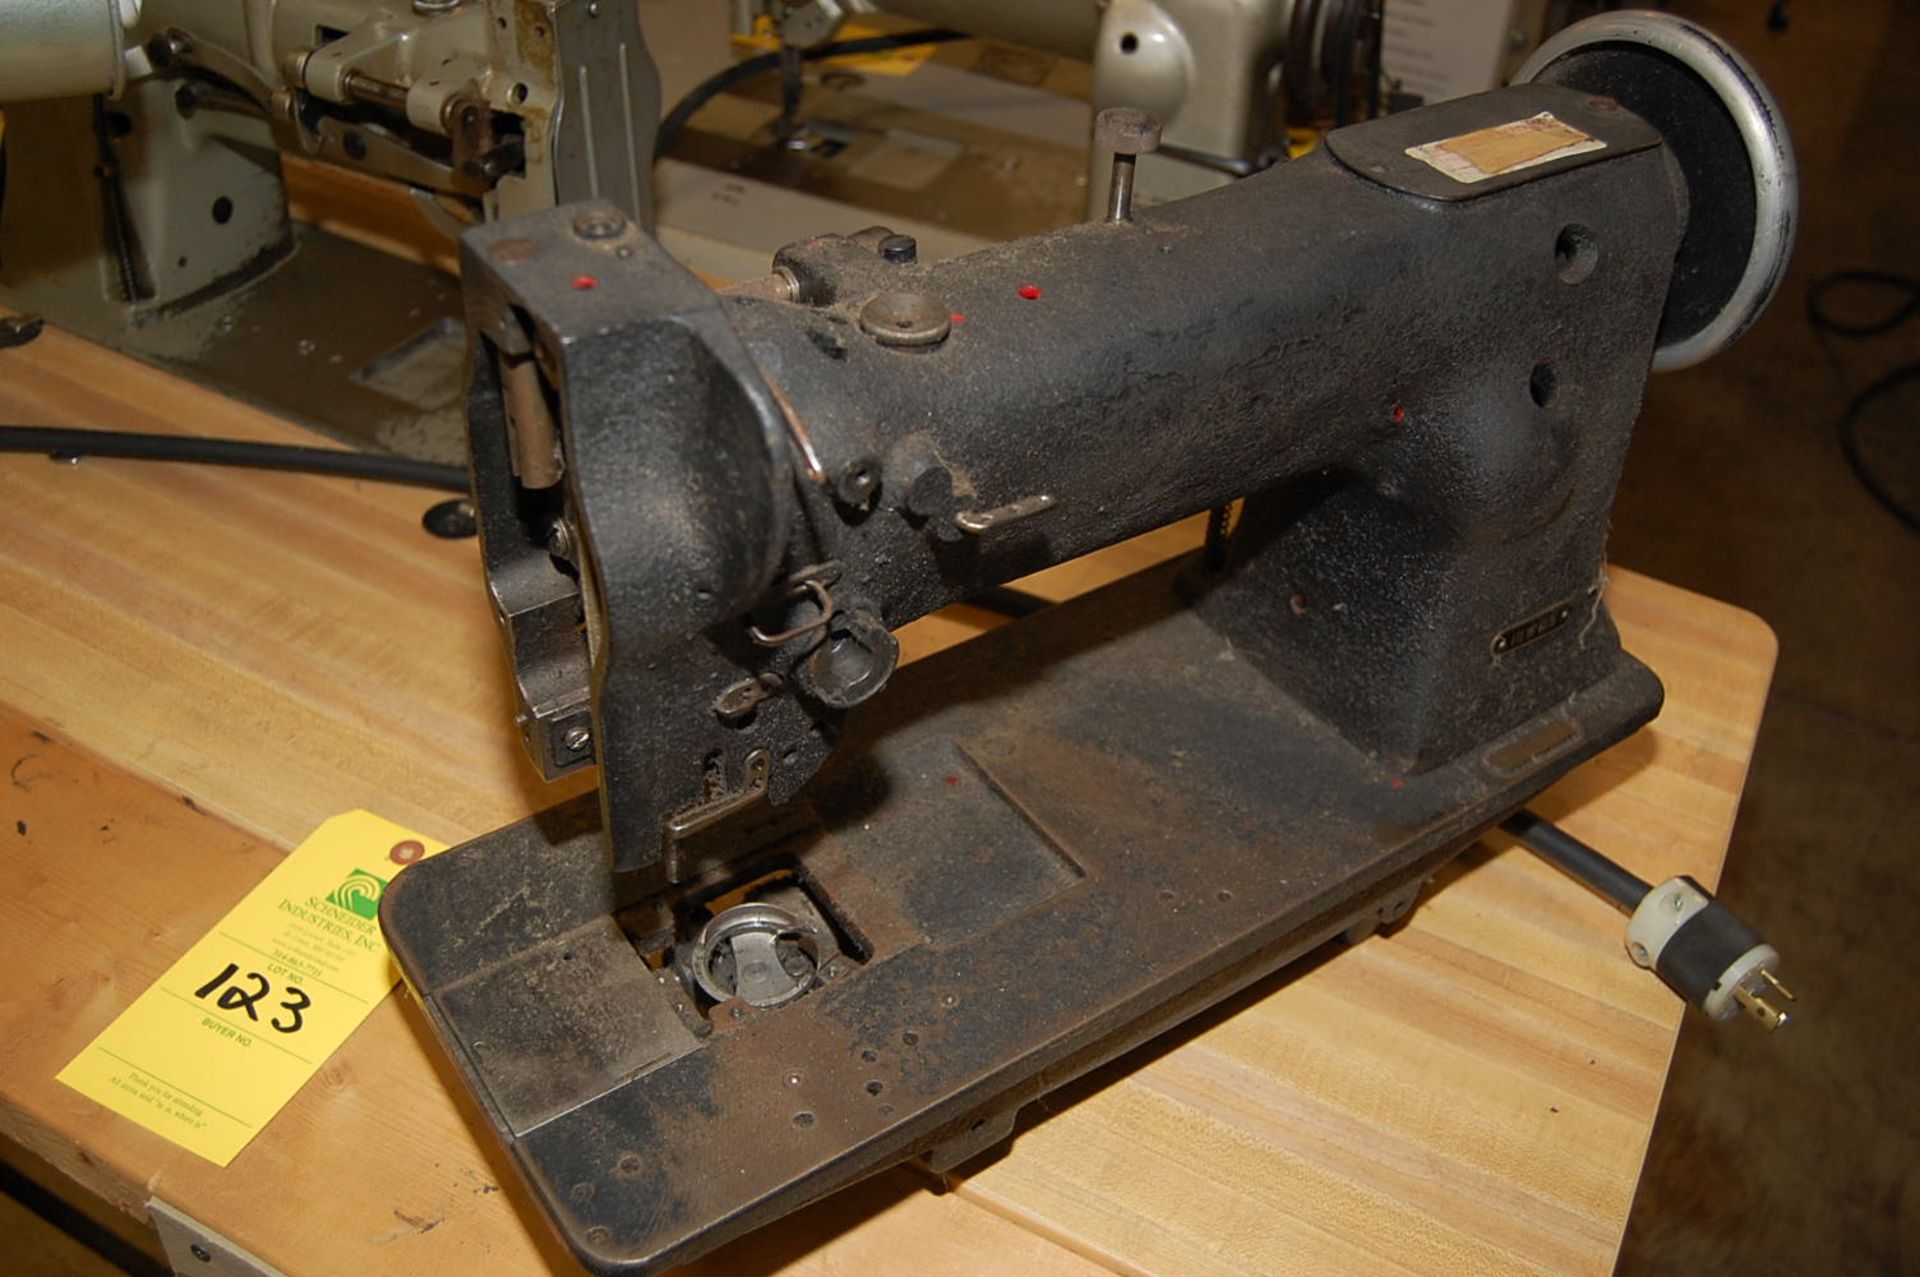 Singer Model #111W155 Sewing Machine Mounted on Bench, Serial #W1376874